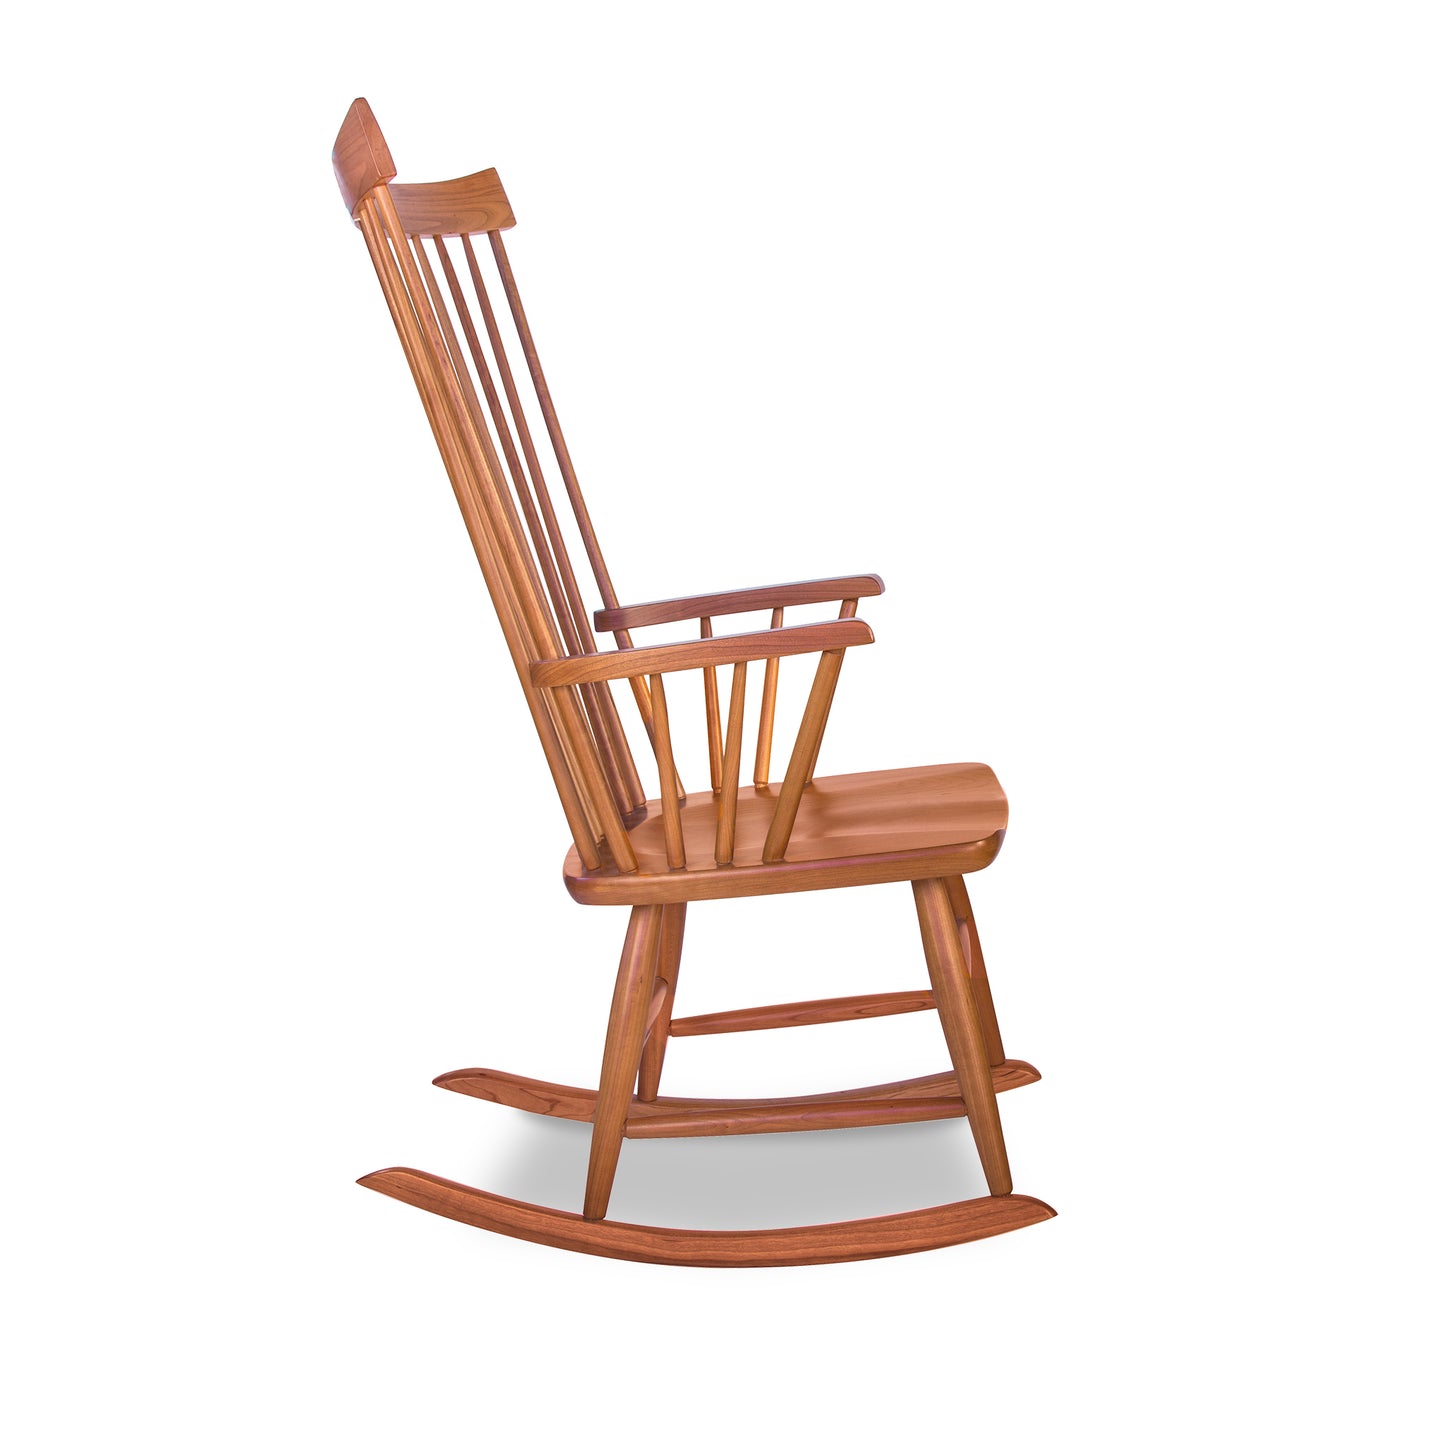 A Lyndon Furniture Windsor Rocking Chair on a white background.